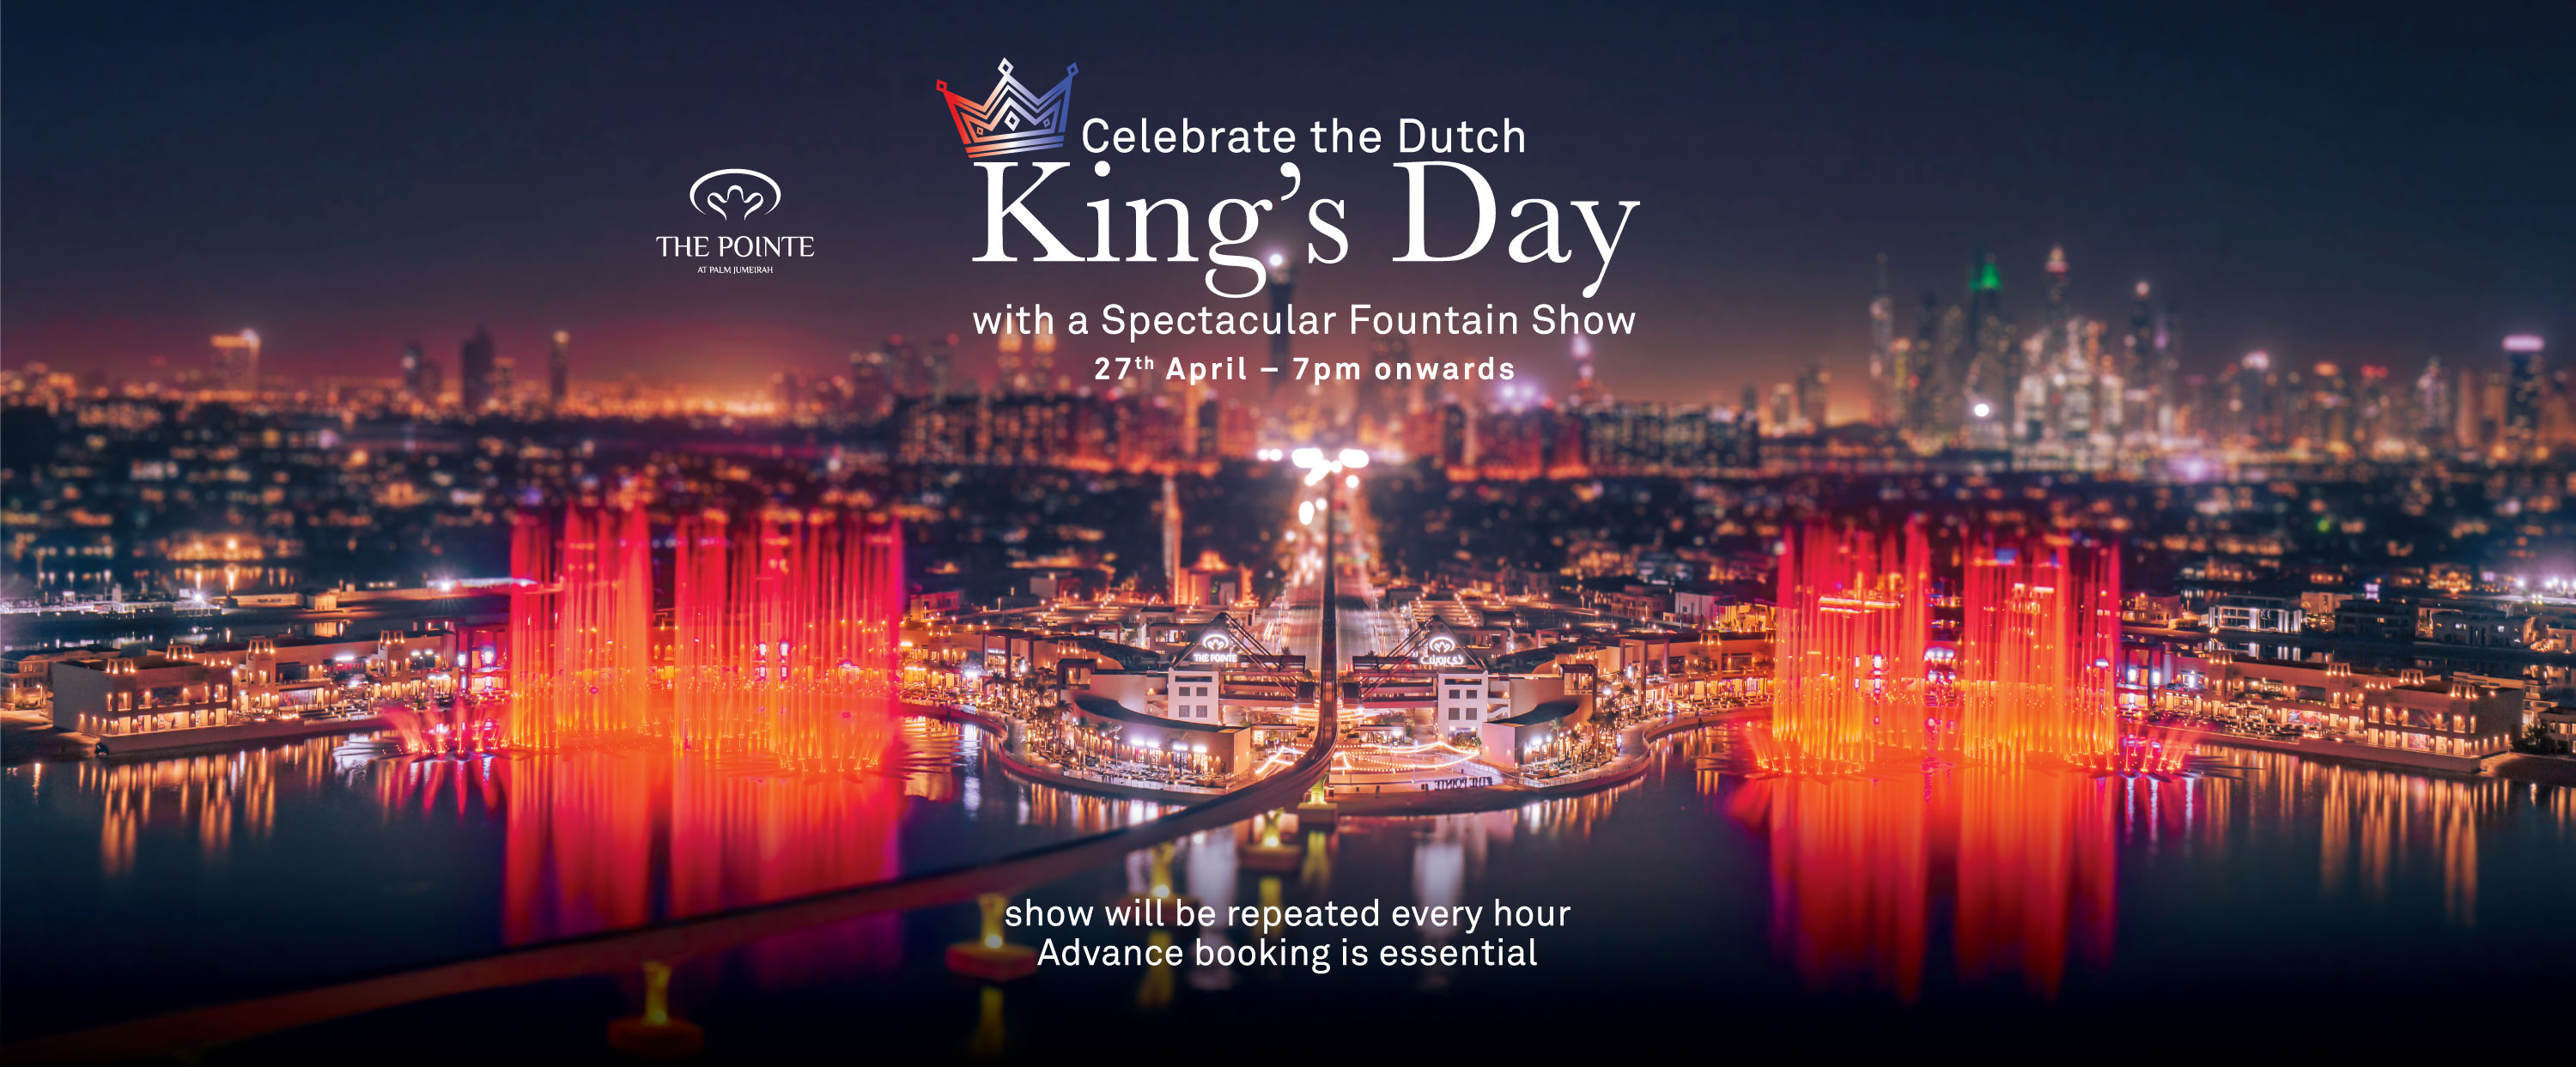 Celebrate King’s Day like a royal at The Pointe